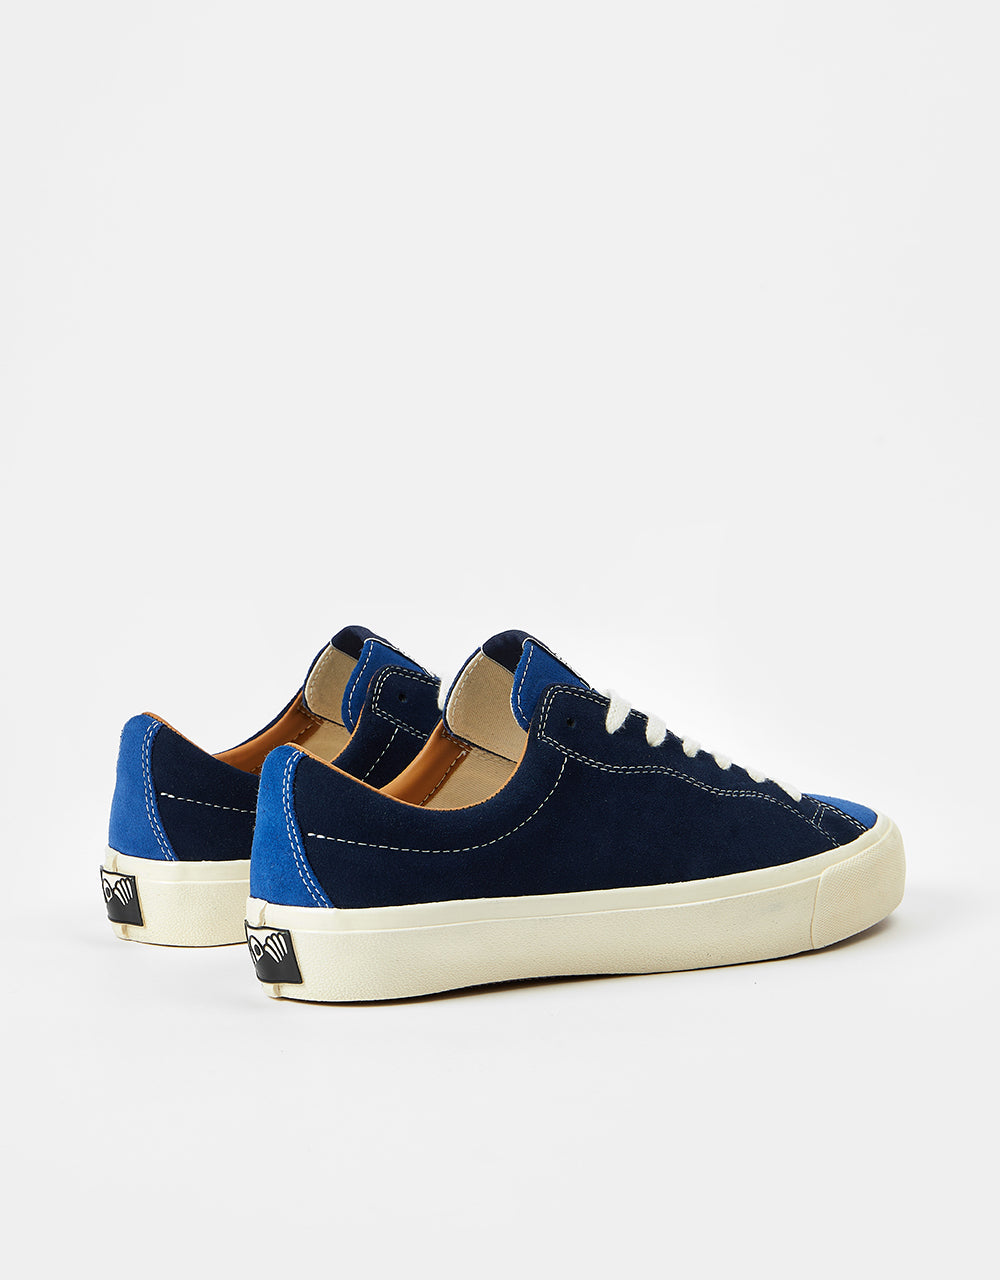 Last Resort AB VM003 Suede Lo Skate Shoes - Duo Blue/White